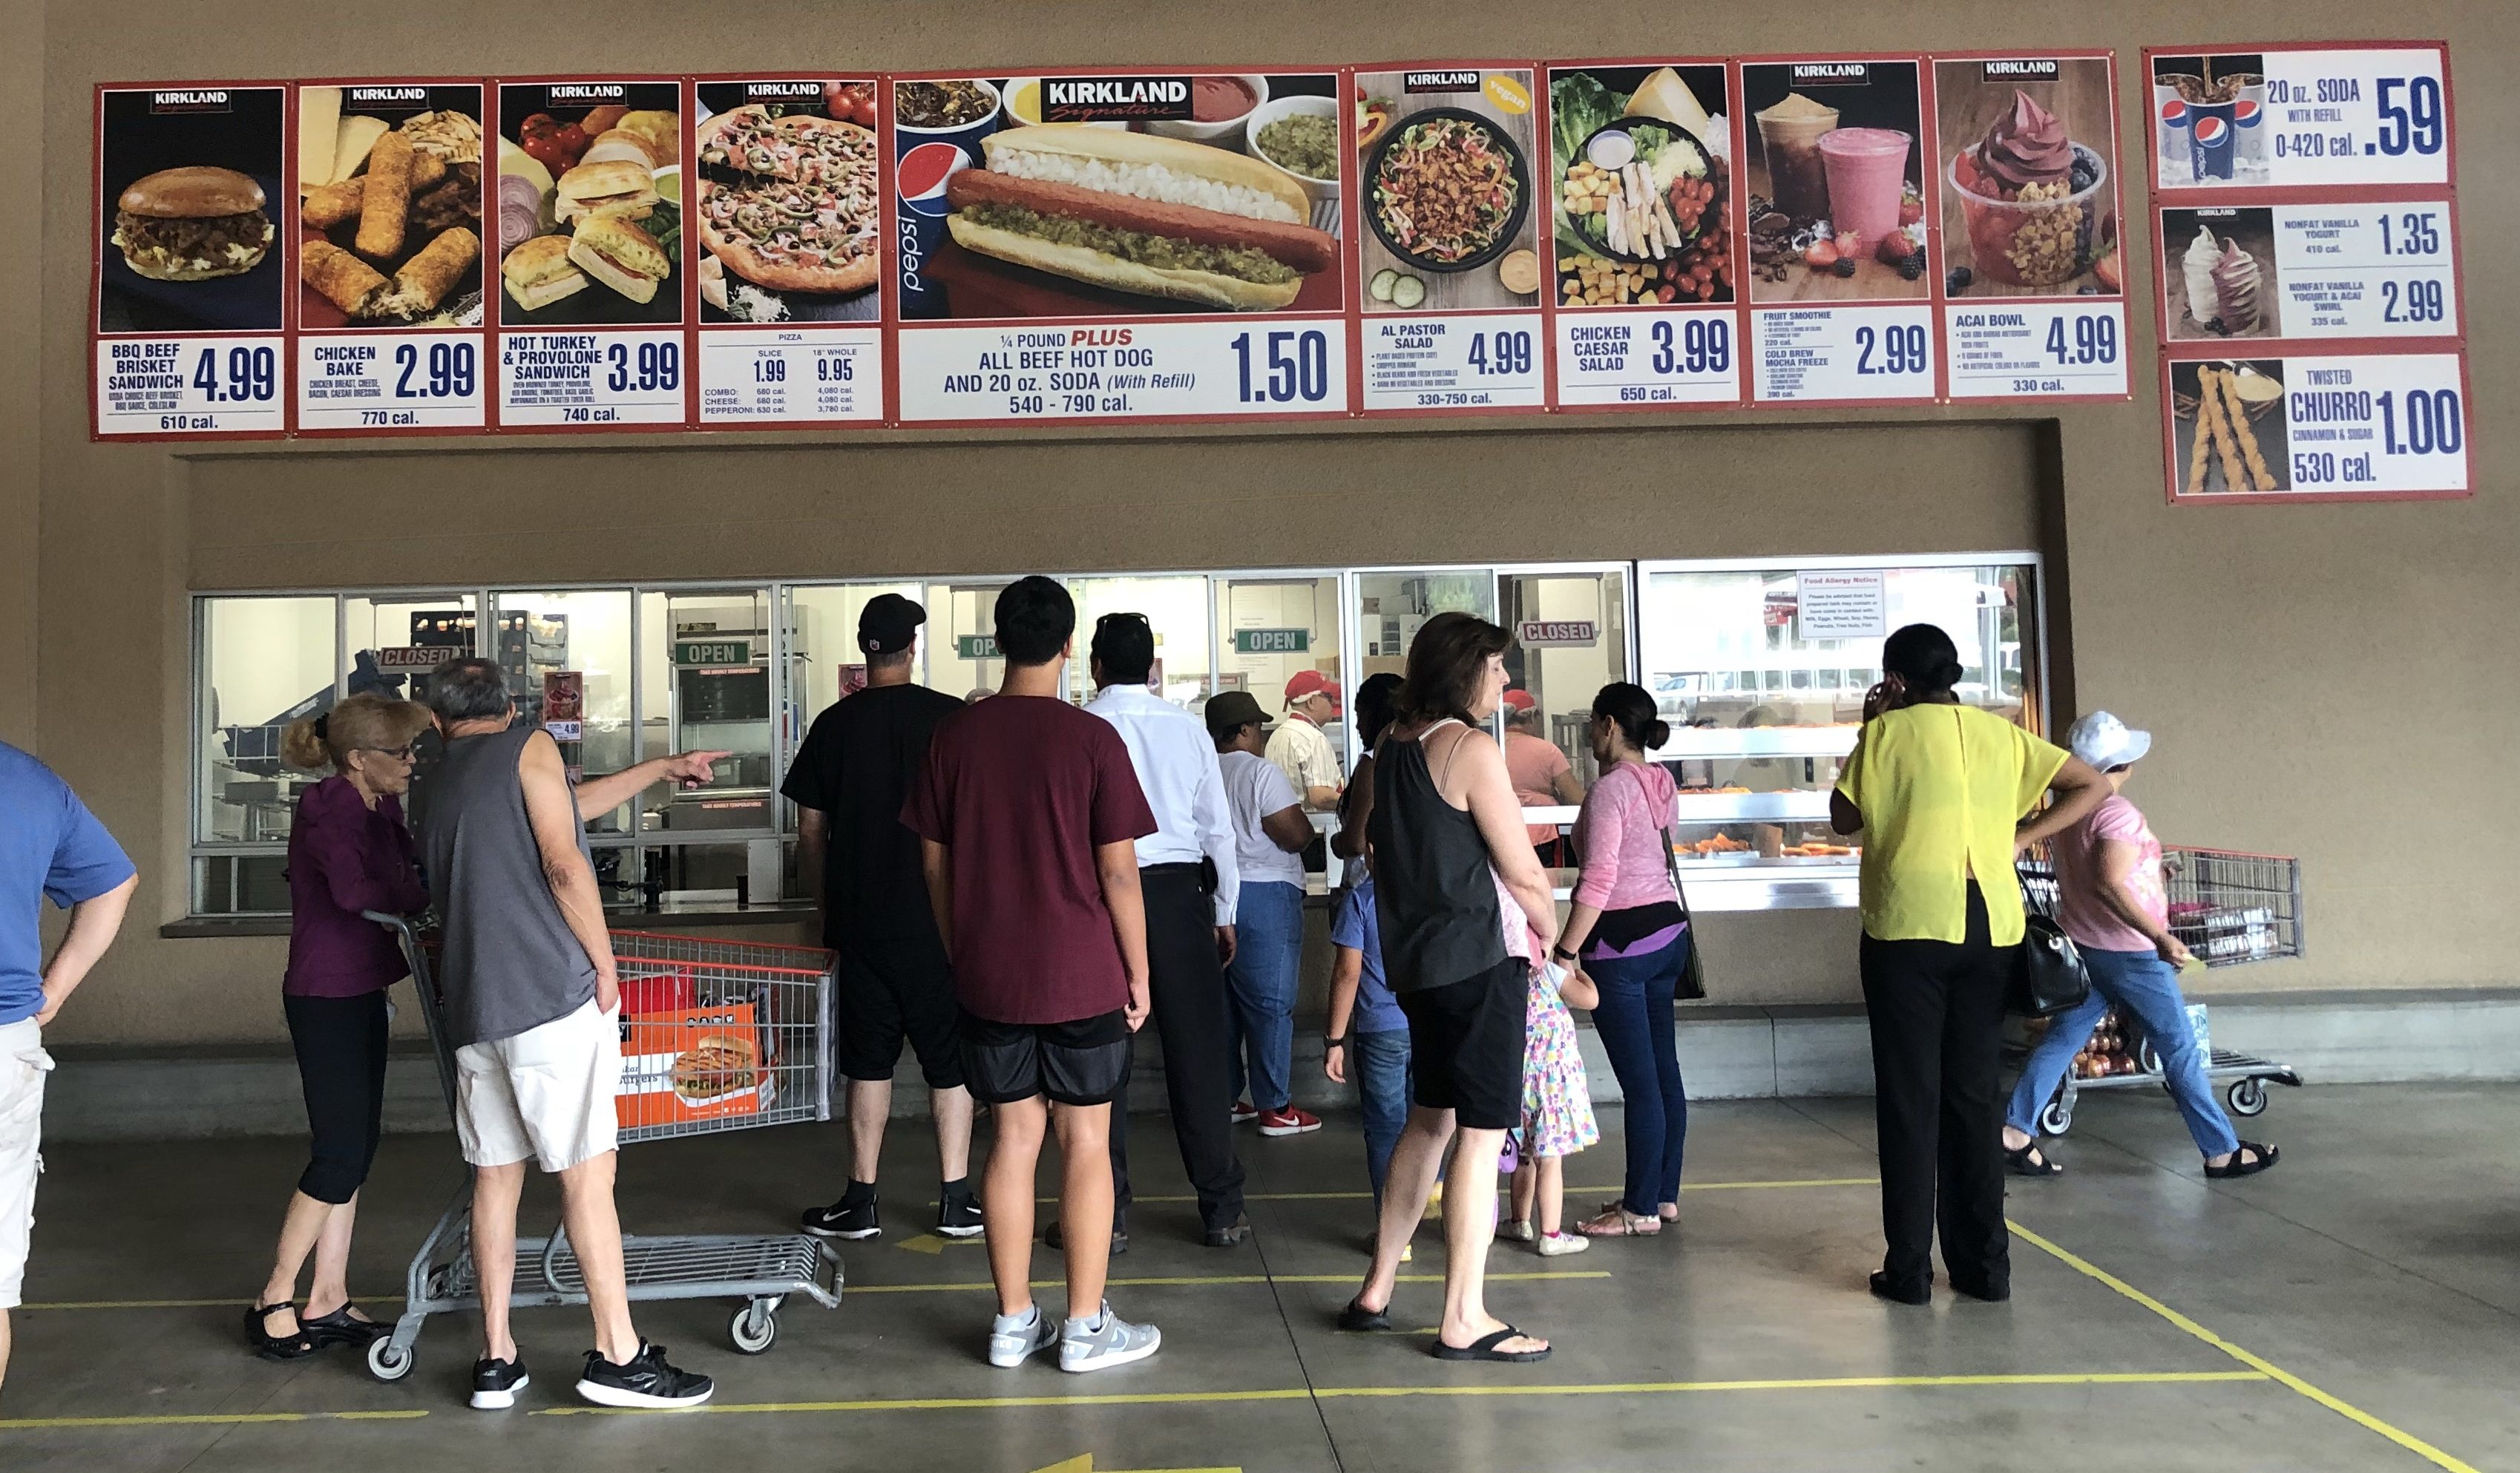 Costco pulls the polish hot dog from their menu of their food court like this one